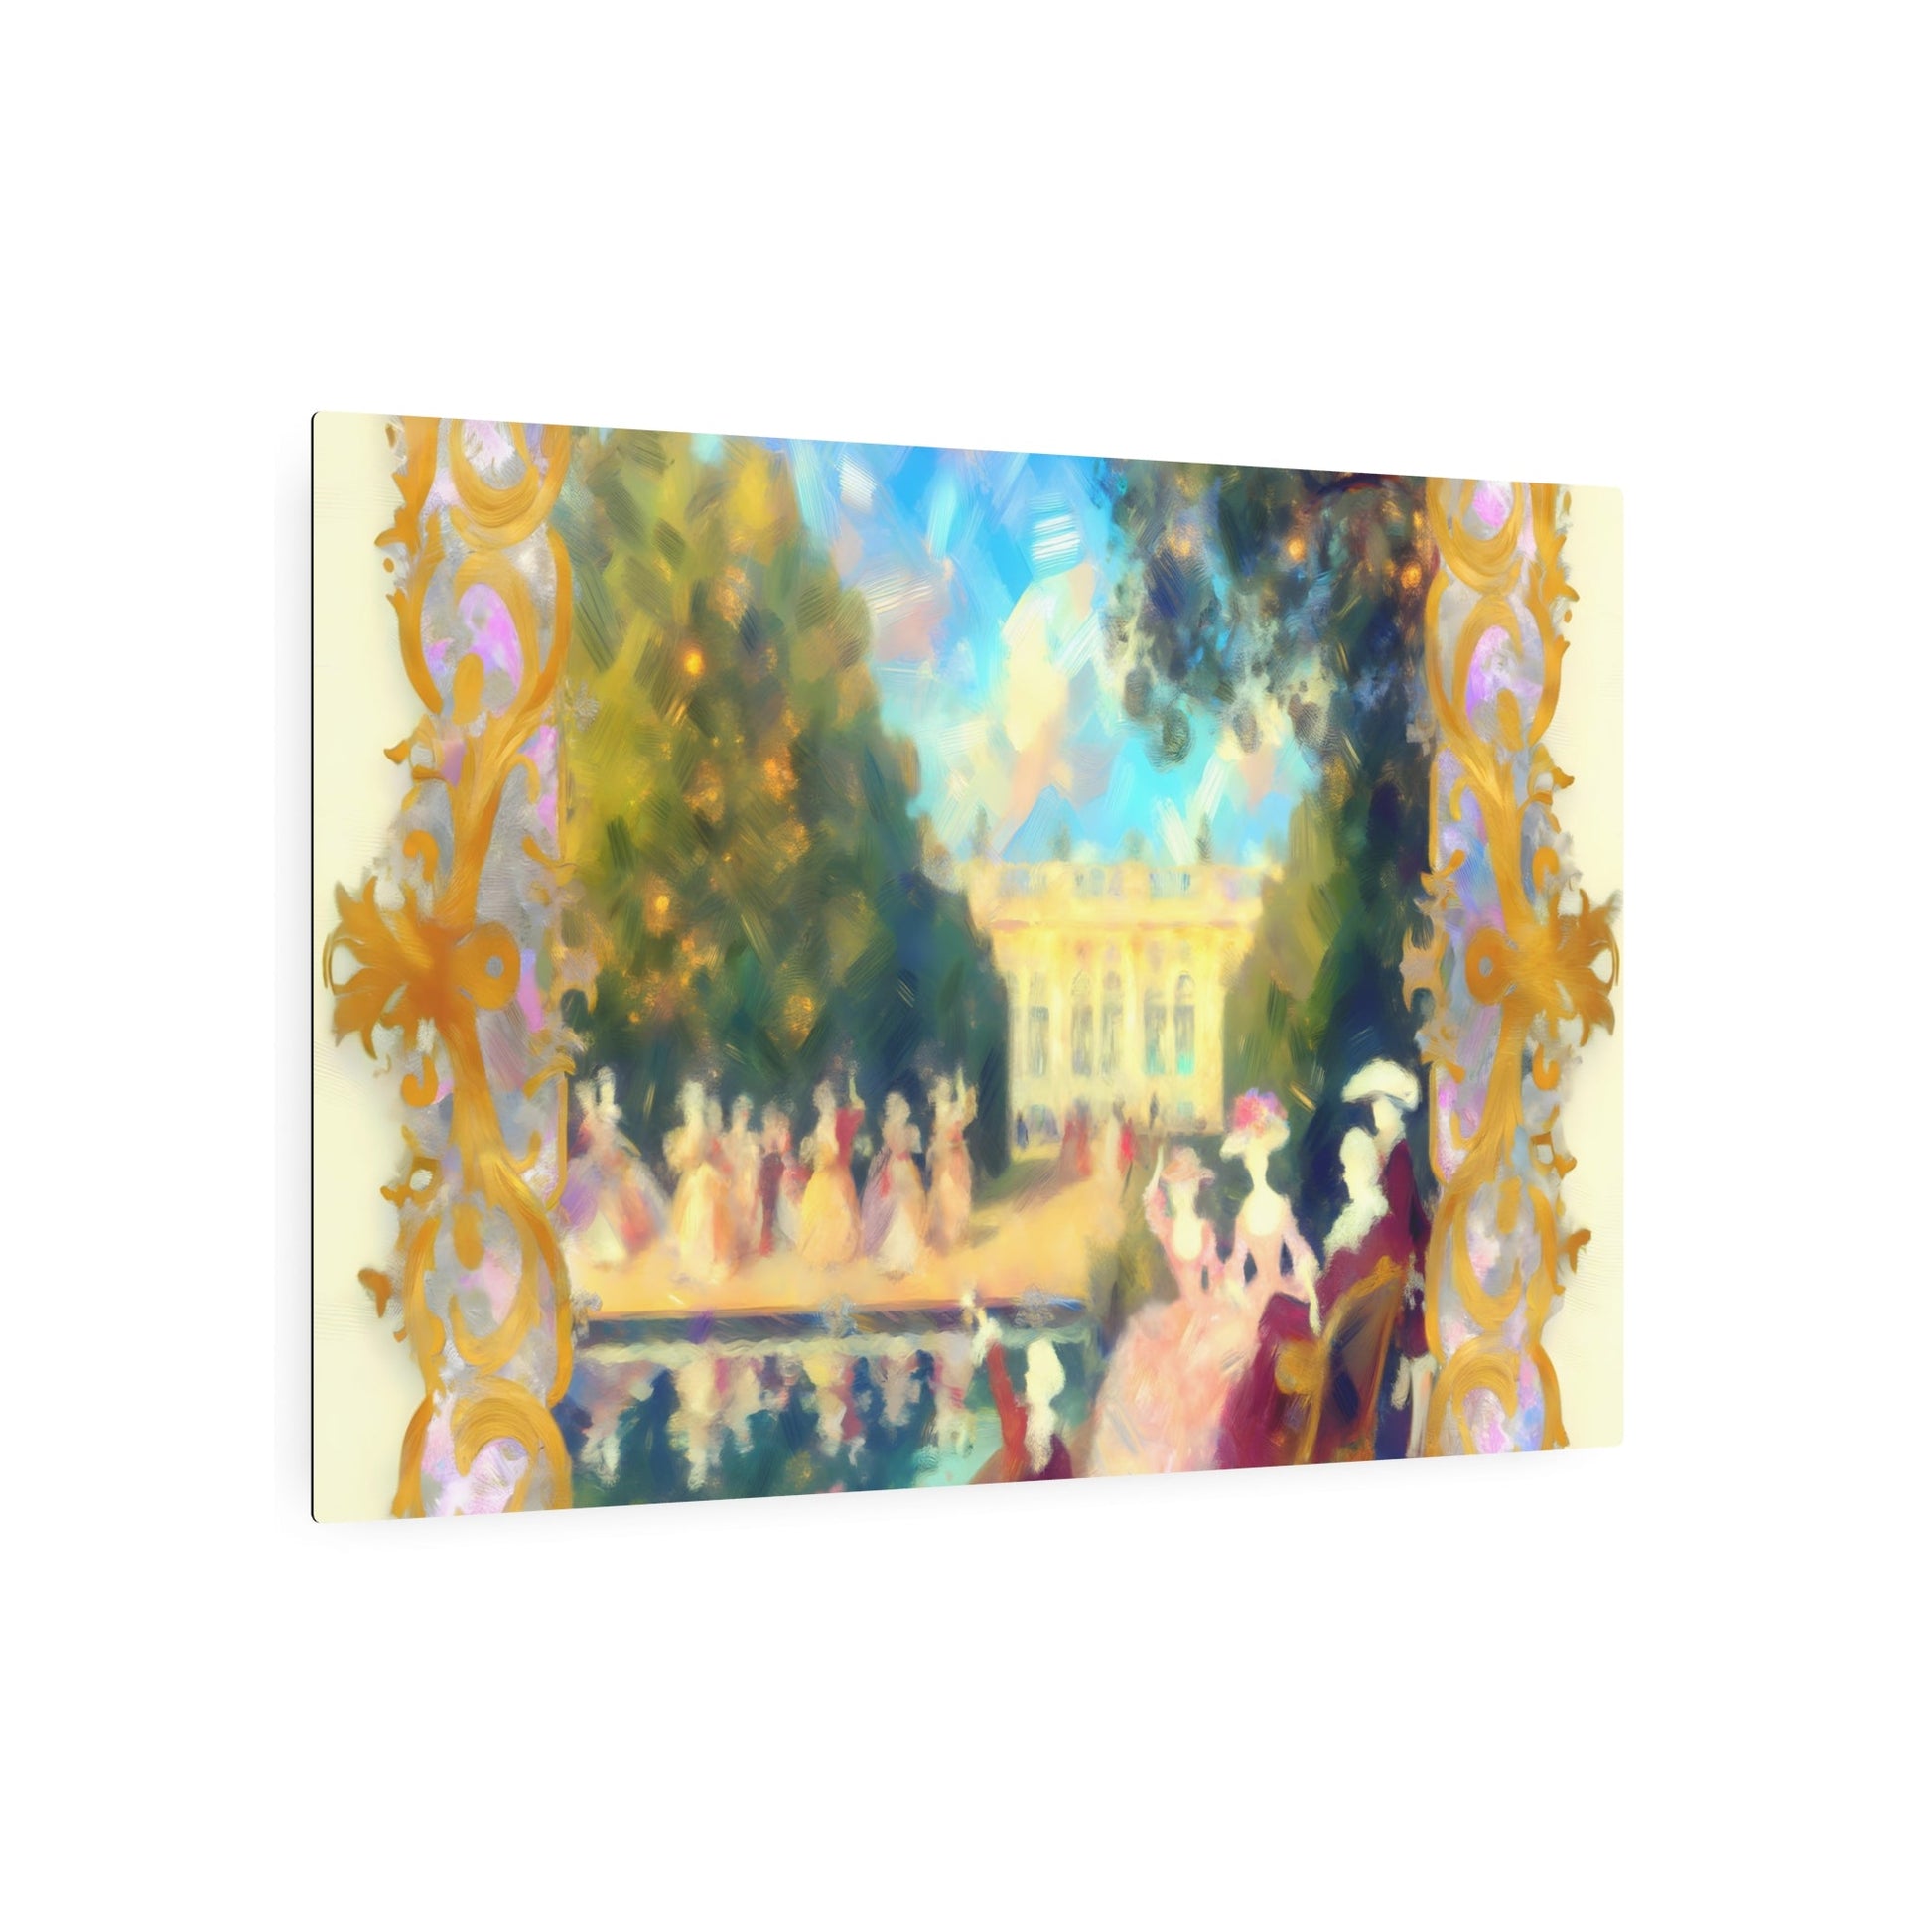 Metal Poster Art | "Romantic Rococo Artwork: Opulent Details & Light Color Palette in Western Art Styles Collection" - Metal Poster Art 36″ x 24″ (Horizontal) 0.12''